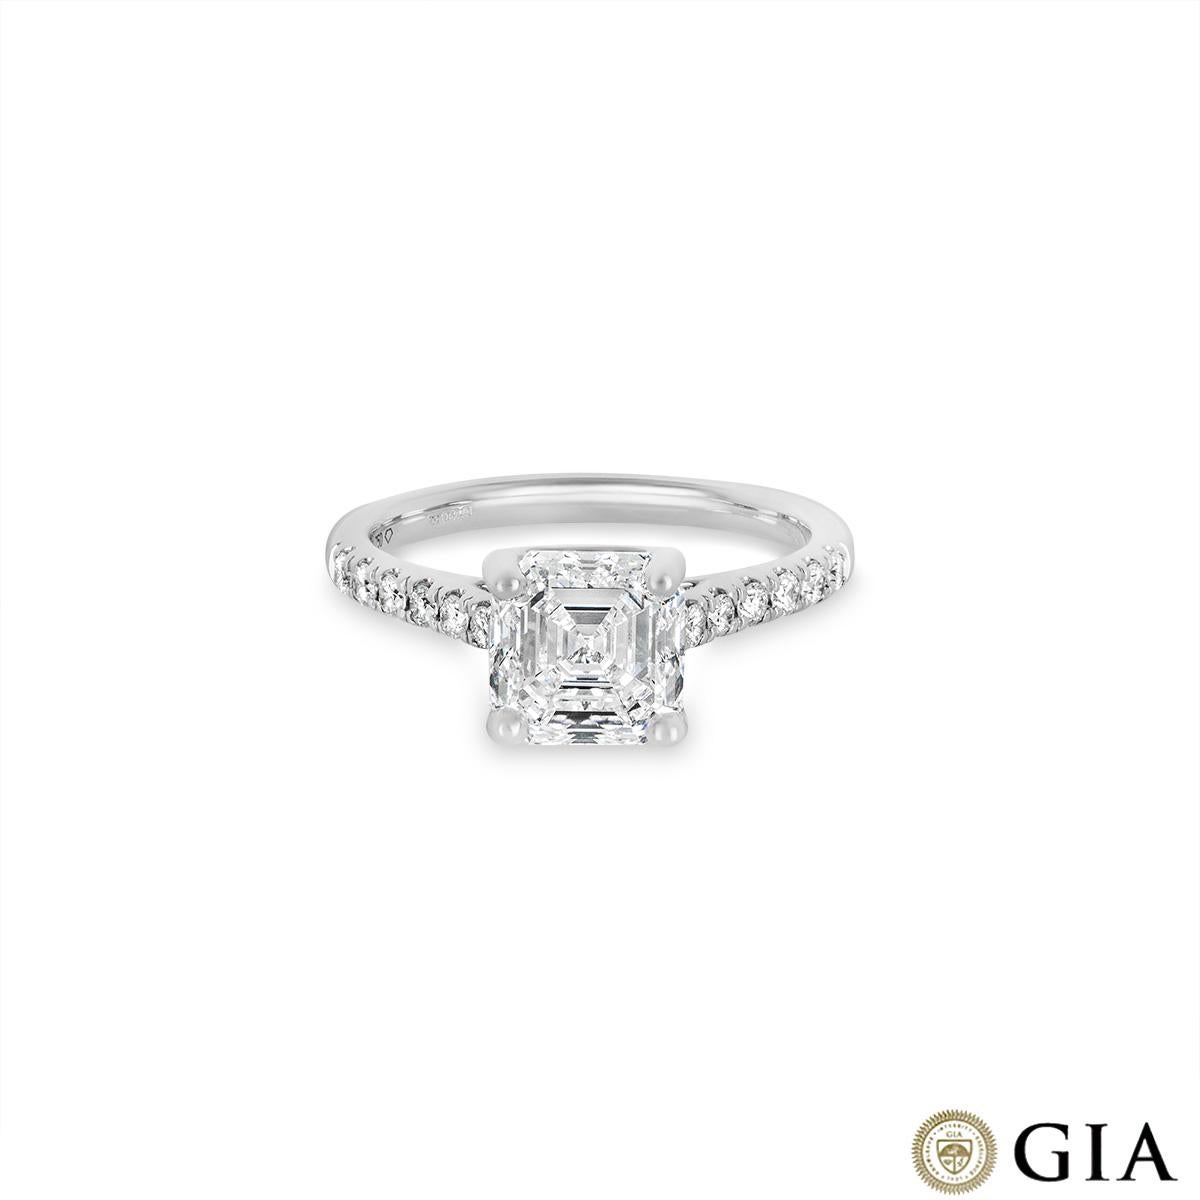 GIA Certified White Gold Asscher Cut Diamond Ring 2.40 Carat G/VS1 In New Condition For Sale In London, GB